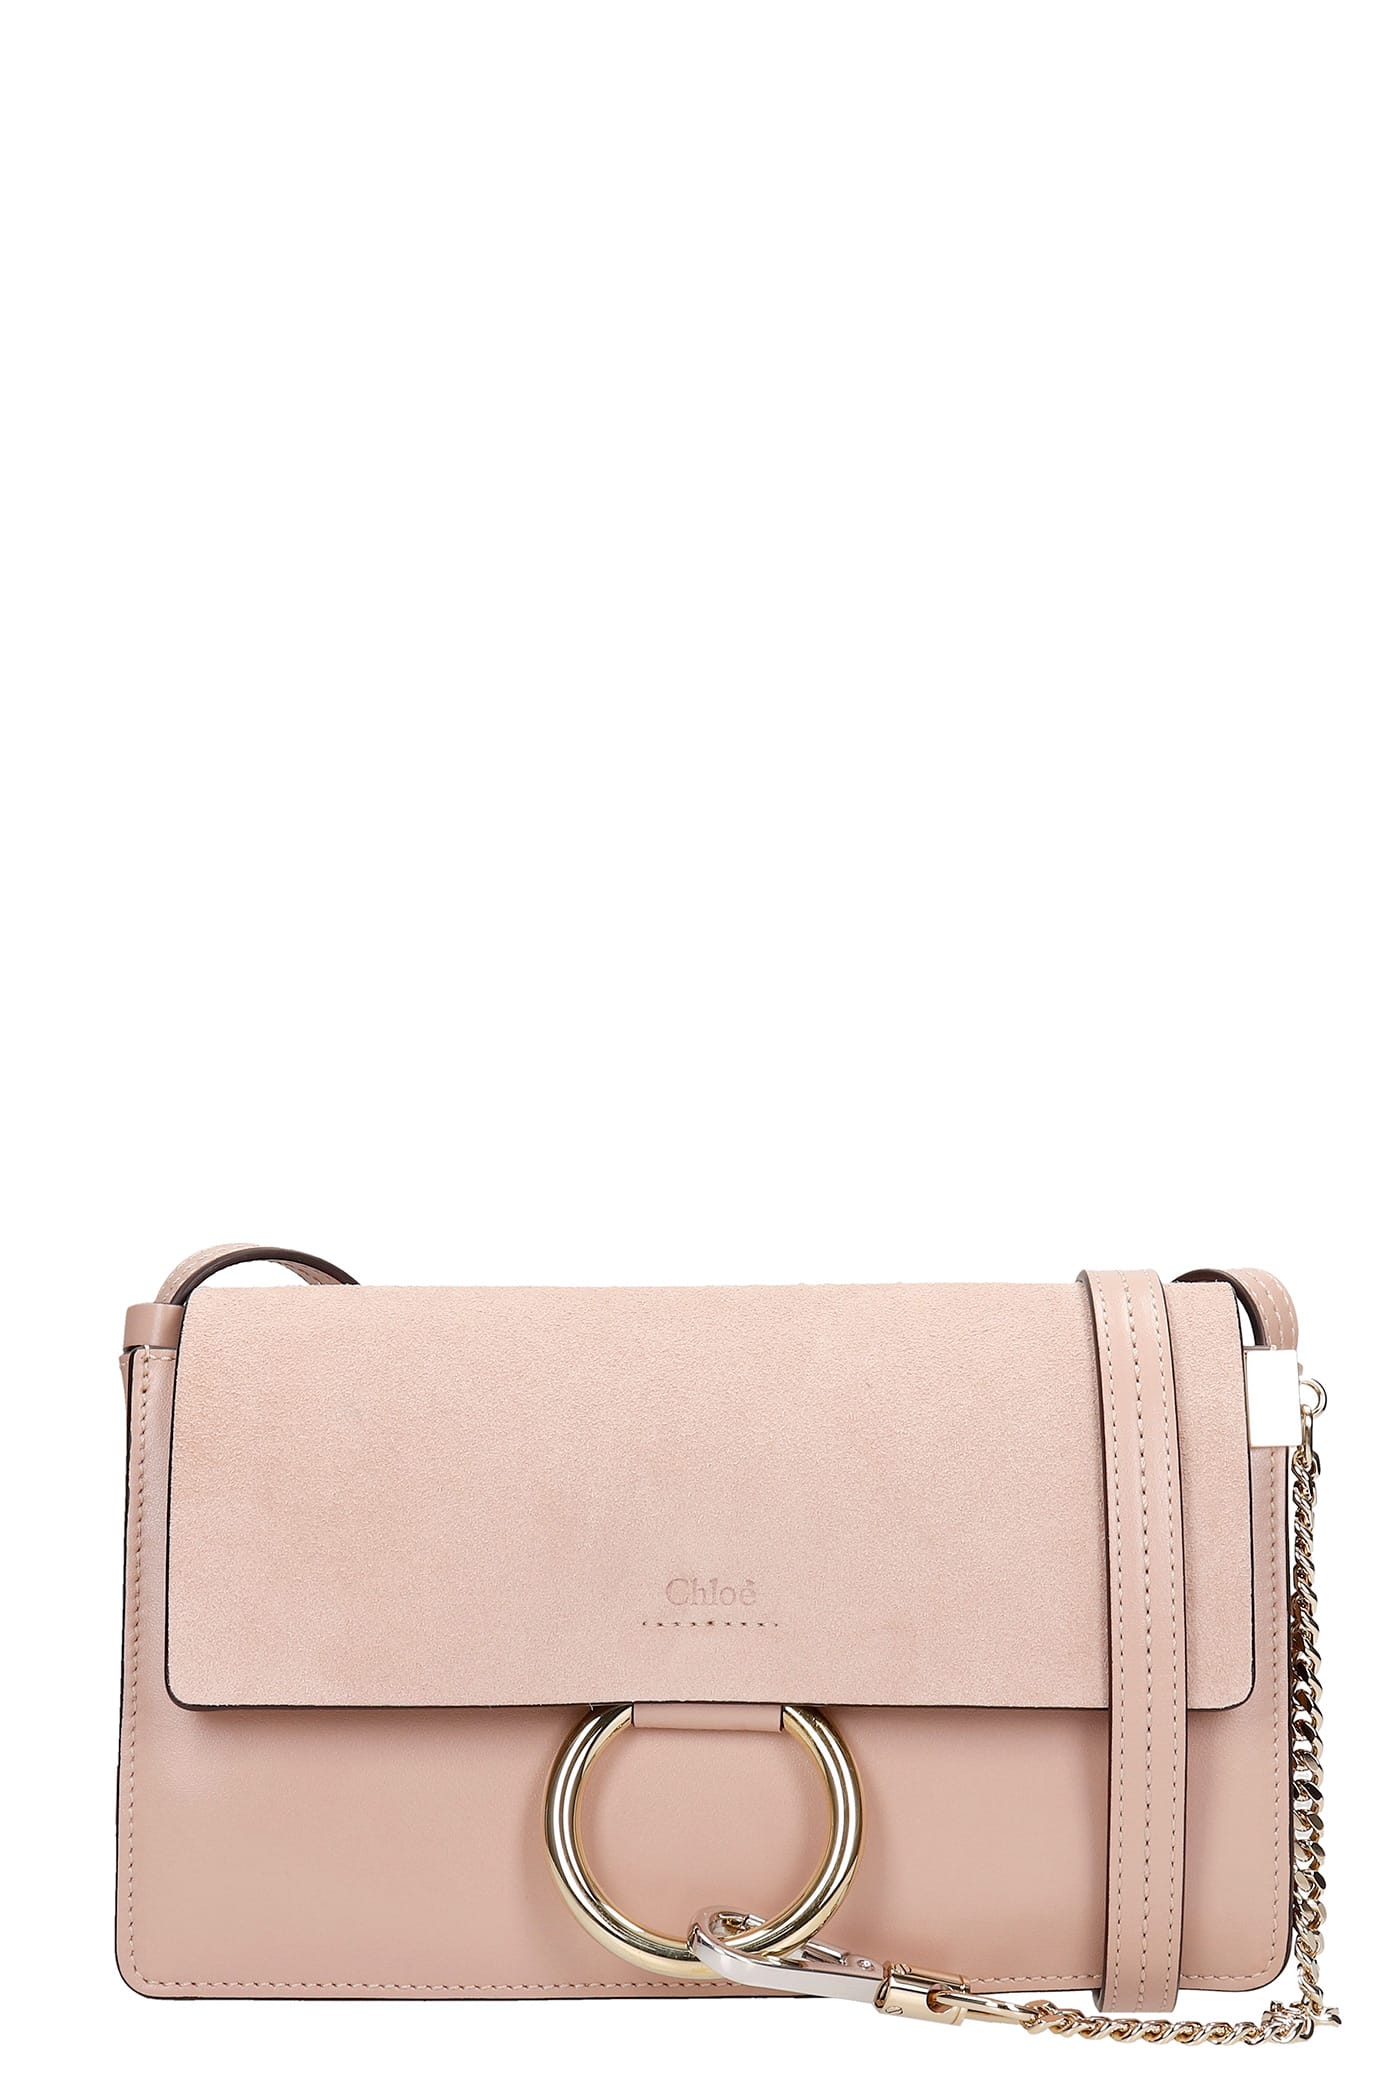 CHLOÉ FAYE SHOULDER BAG IN ROSE-PINK SUEDE AND LEATHER,CHC21SS127A376K6